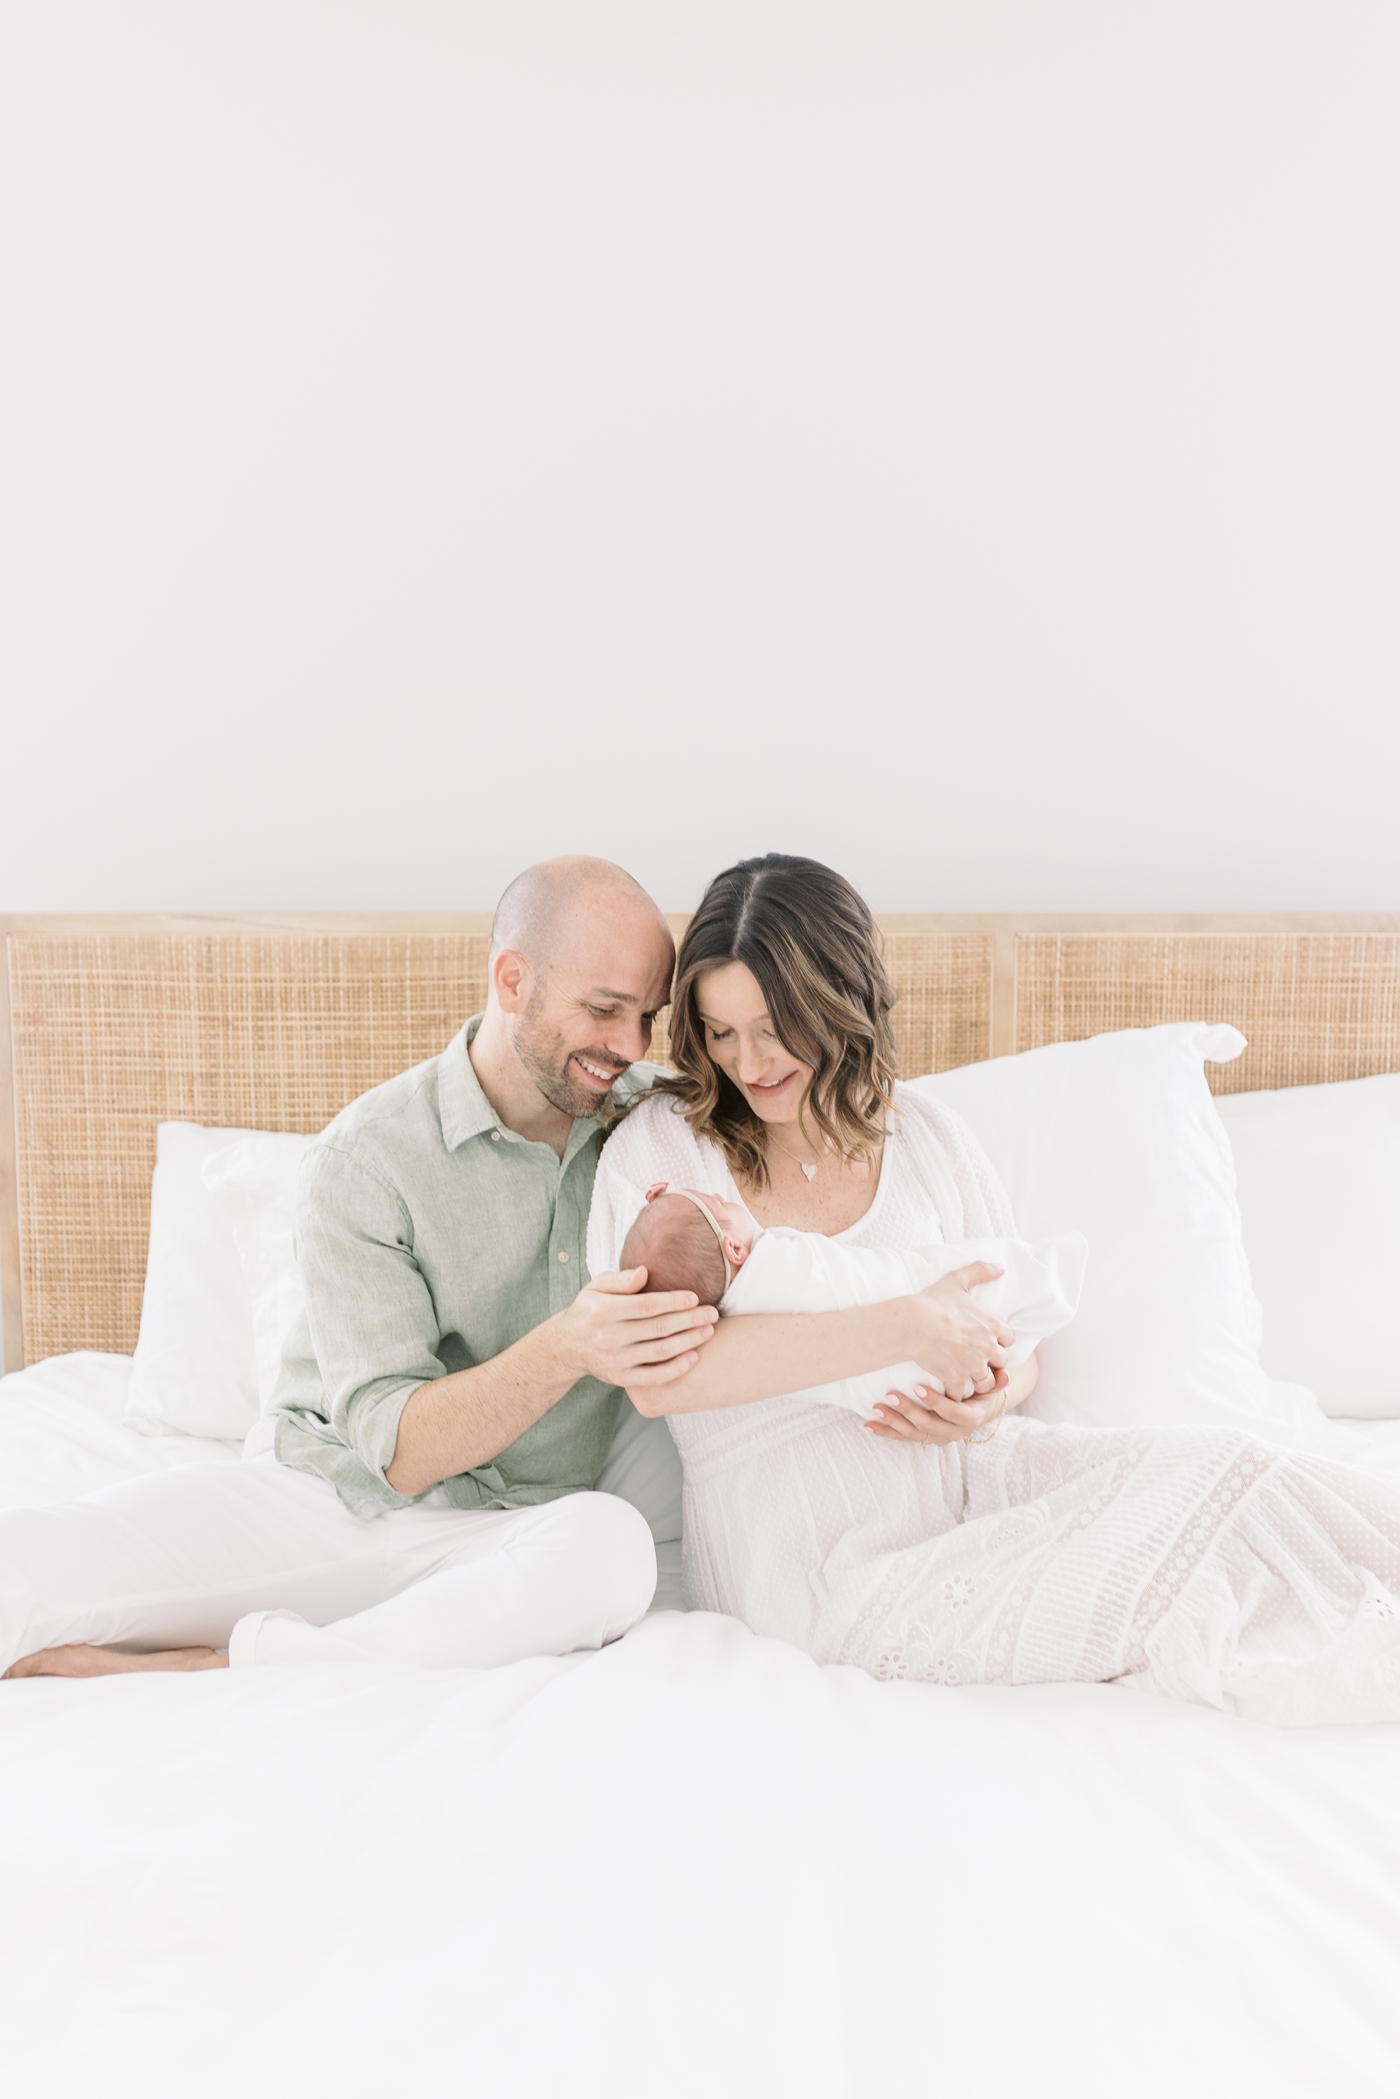 Mom and dad smiling holding baby girl | Photo by Caitlyn Motycka Photography.